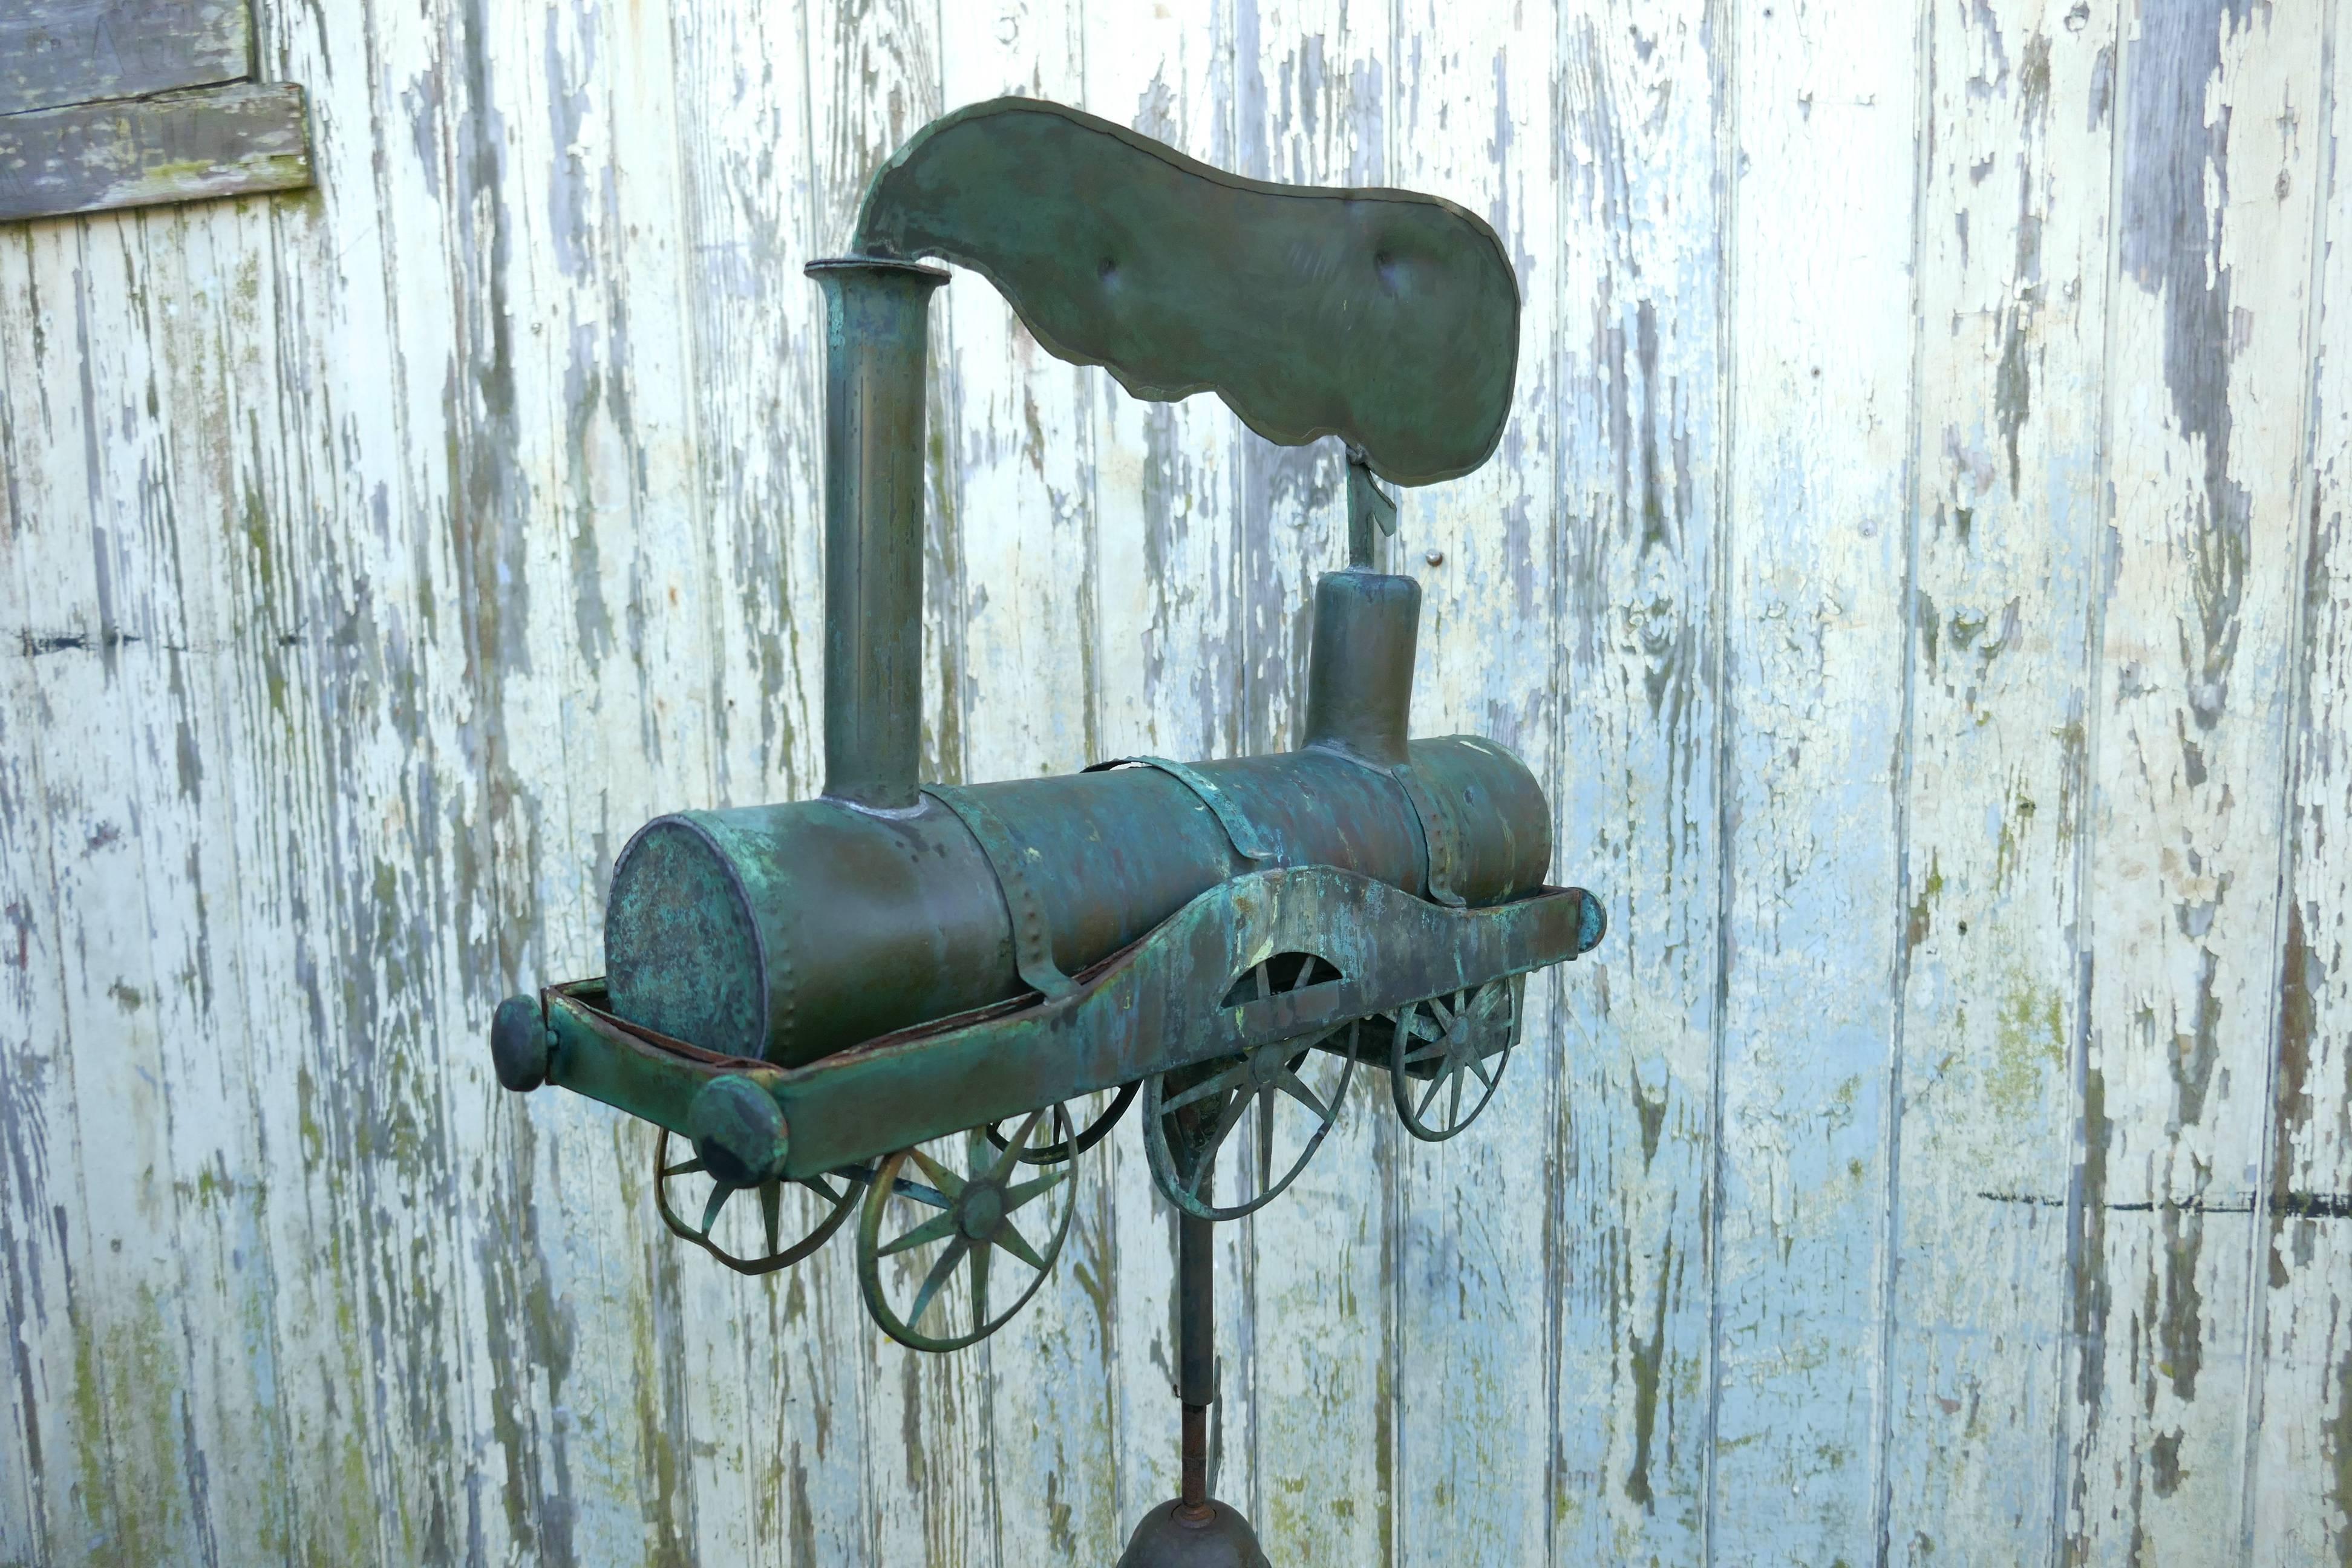 19th century Cornish copper Folk Art steam train, locomotive weathervane

The model steam train at the top of this Weathervane is hand made in Cornish copper, the Locomotive is quite detailed in its construction, it has a plume of smoke coming